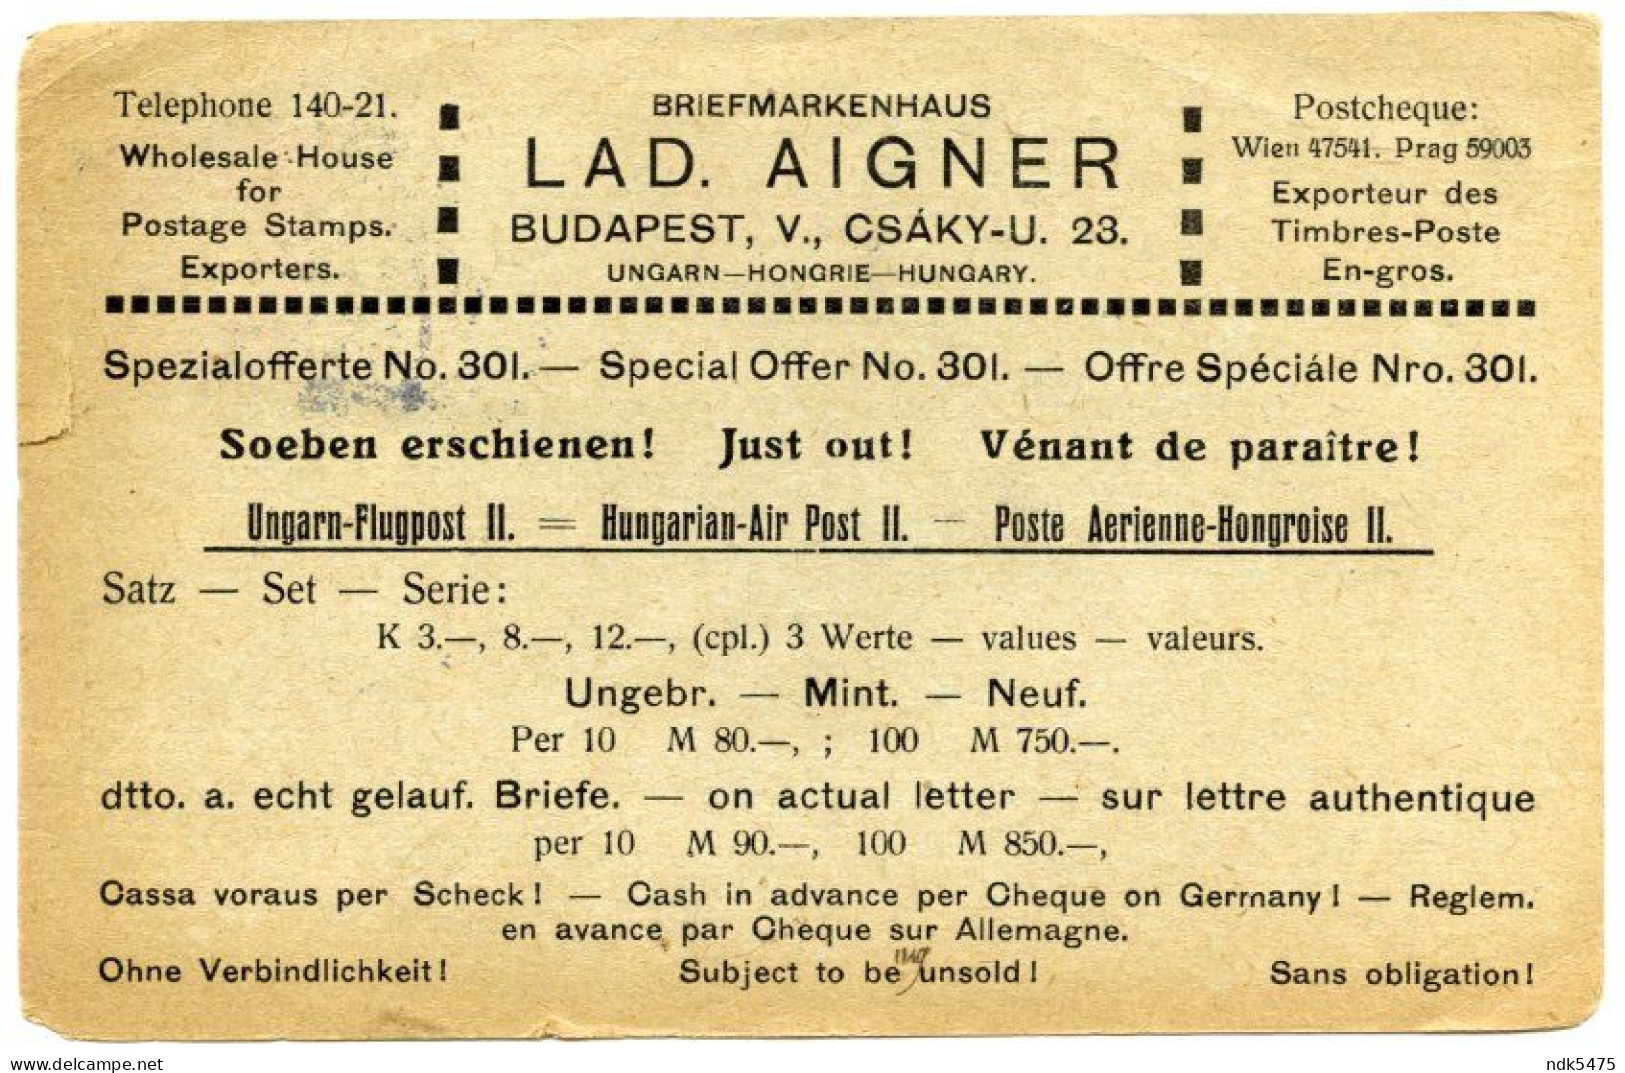 HUNGARY : AIGNER - STAMPS, TIMBRES - BUDAPEST, CSAKY-U. / AIR POST, 1920 / CONSETT, STANLEY, ELMFIELD RD. (CHARANCE) - Ganzsachen